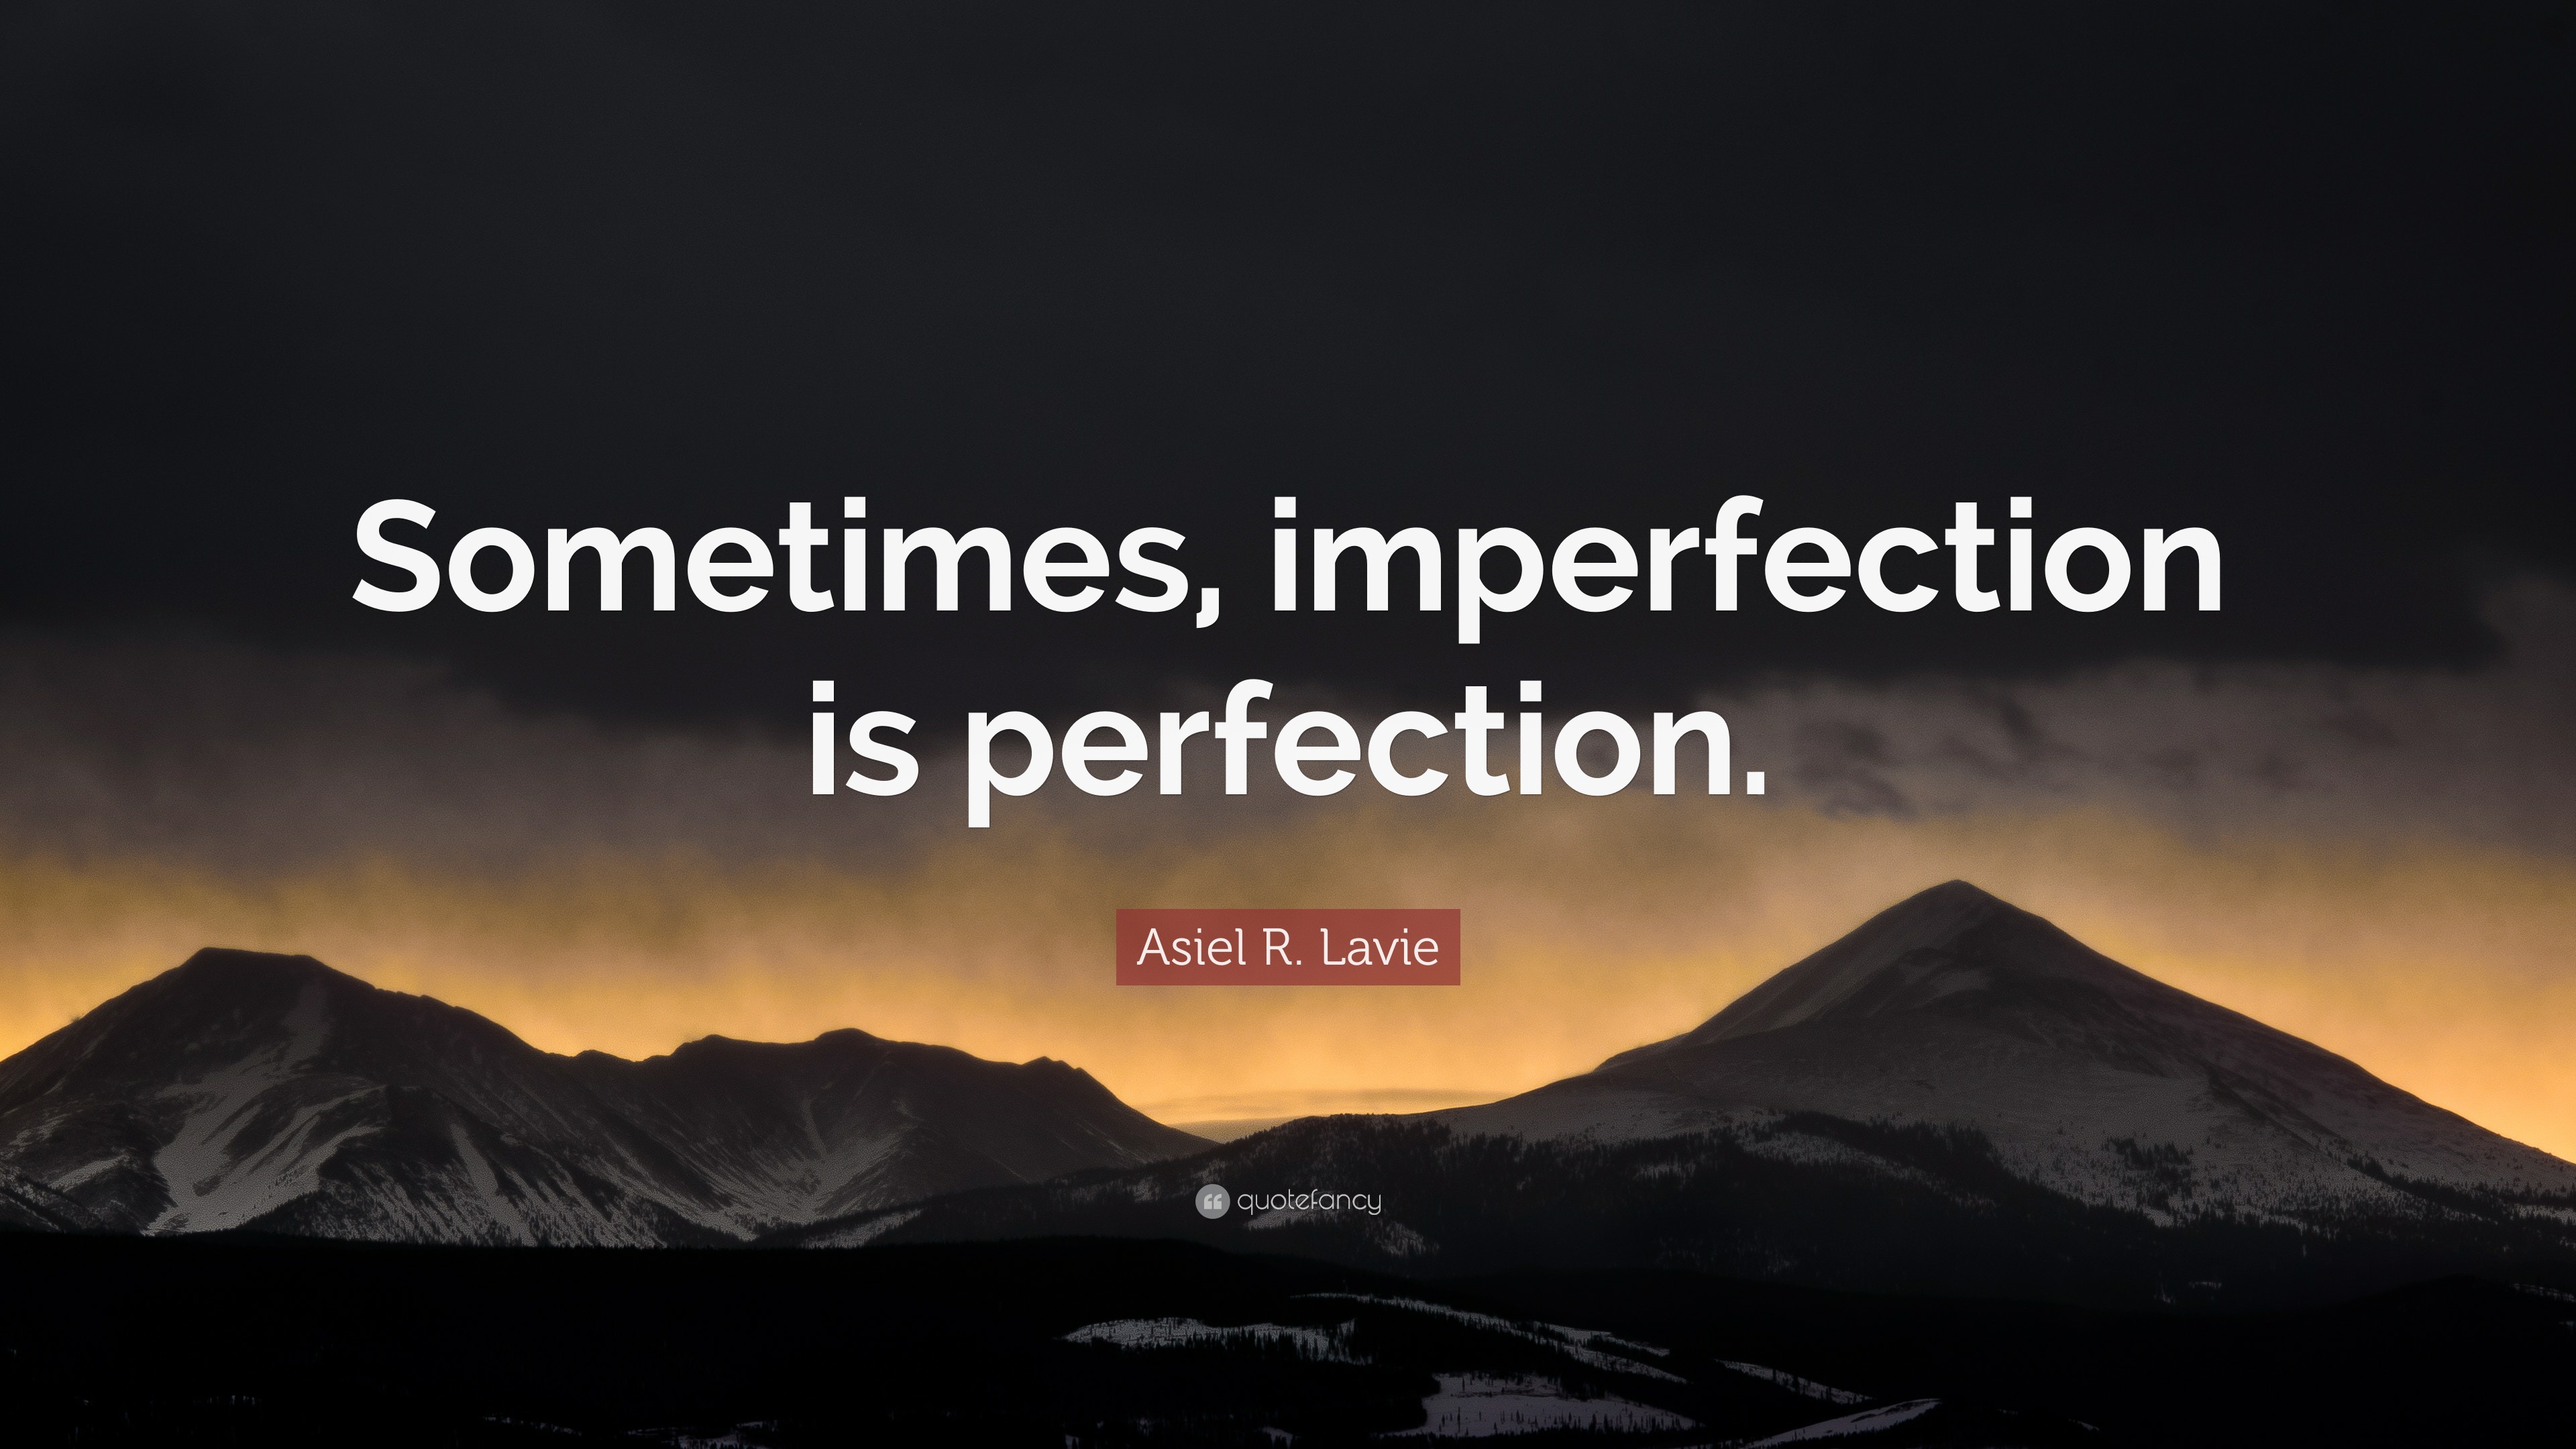 Asiel R. Lavie Quote: “Sometimes, imperfection is perfection.”